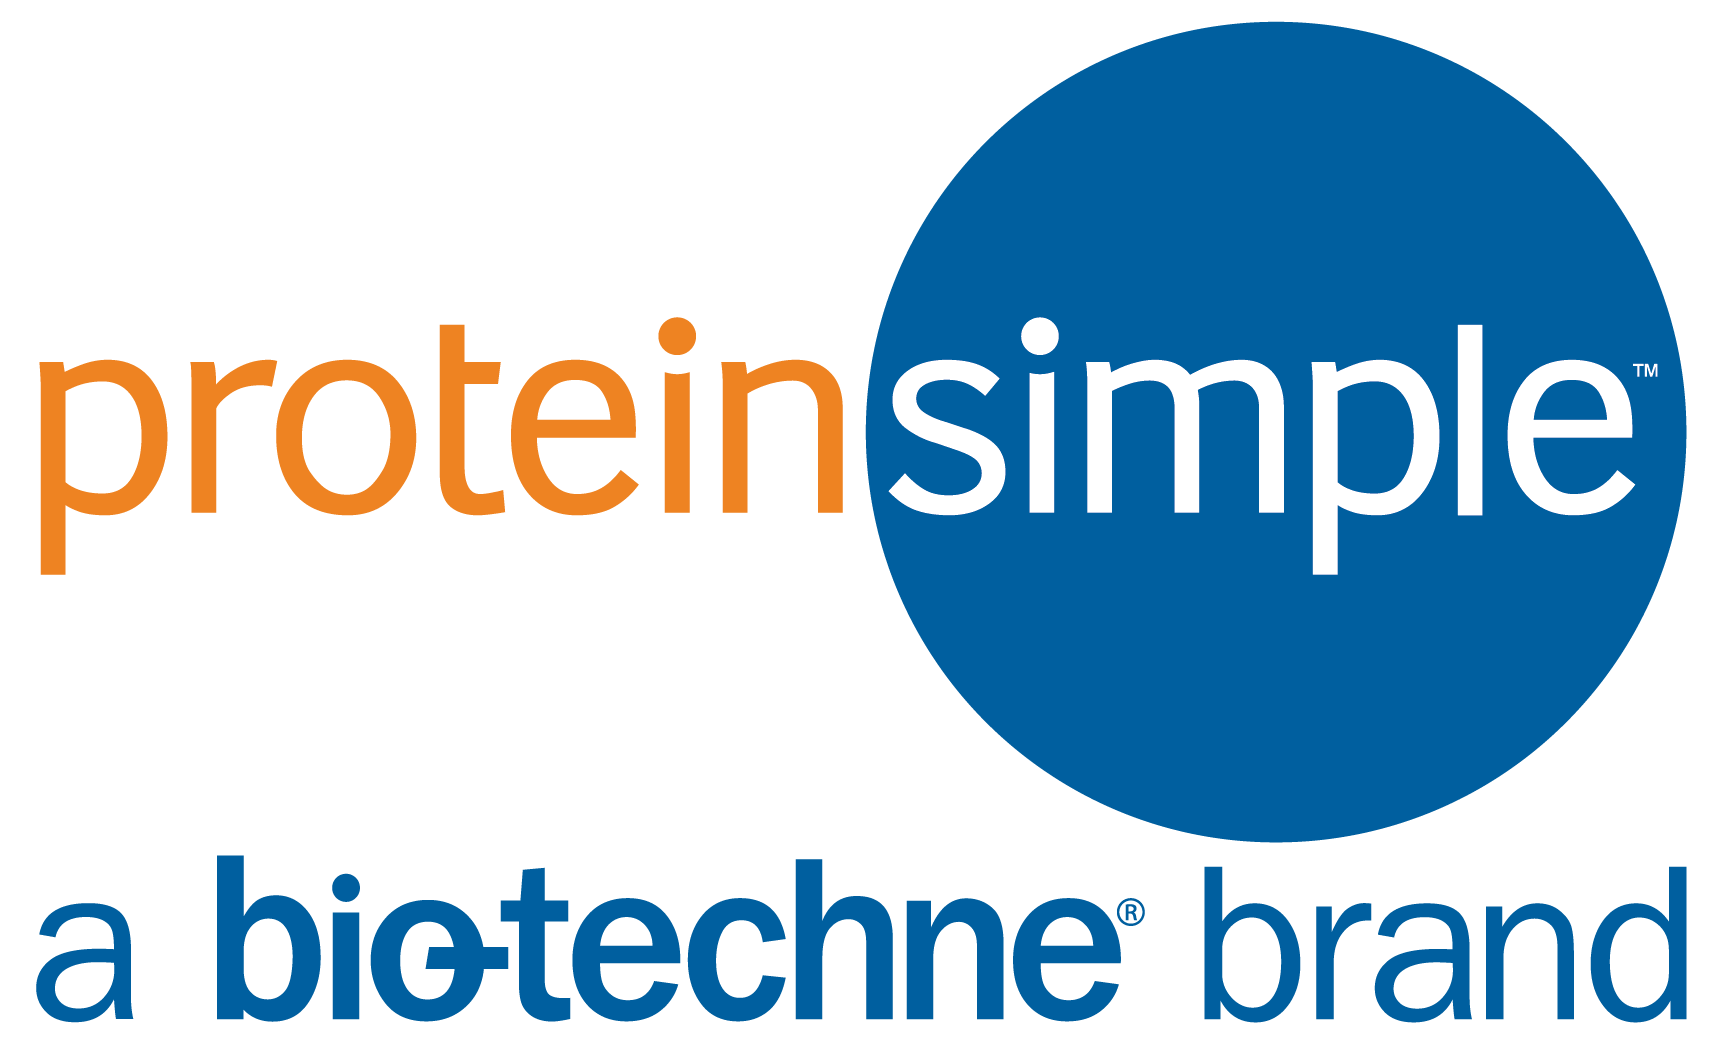 https://www.proteinsimple.com/cell-and-gene-therapy.html?utm_source=CGTI&utm_medium=Sponsorship&utm_campaign=BBU_2021_CGT 